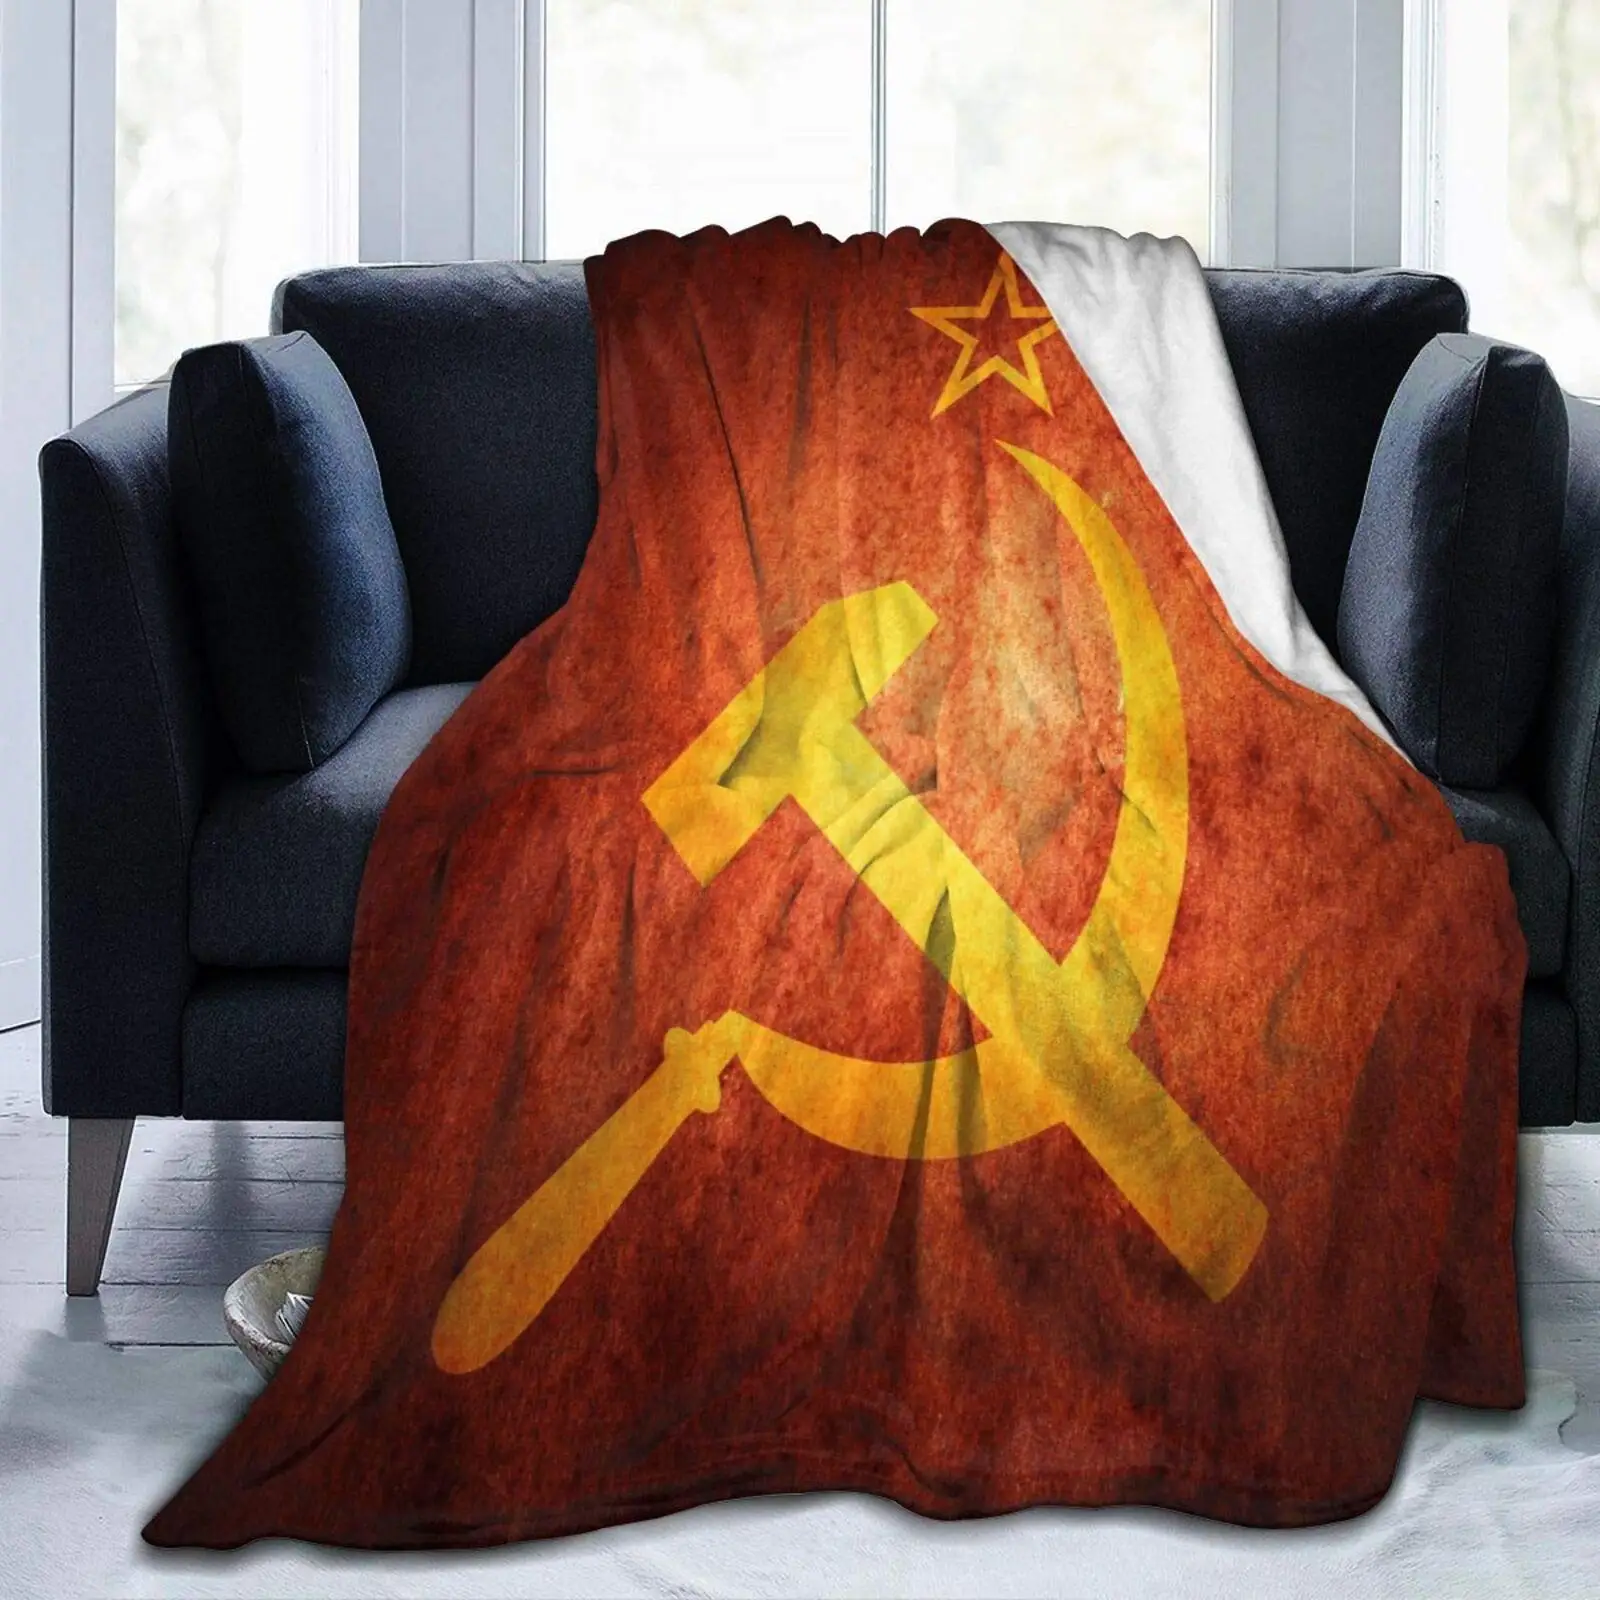 

Flannel Fleece Bed Blankets Lightweight Cozy Throw Blanket for Couch Sofa Adults Kids Yellow Russian Soviet Communistic